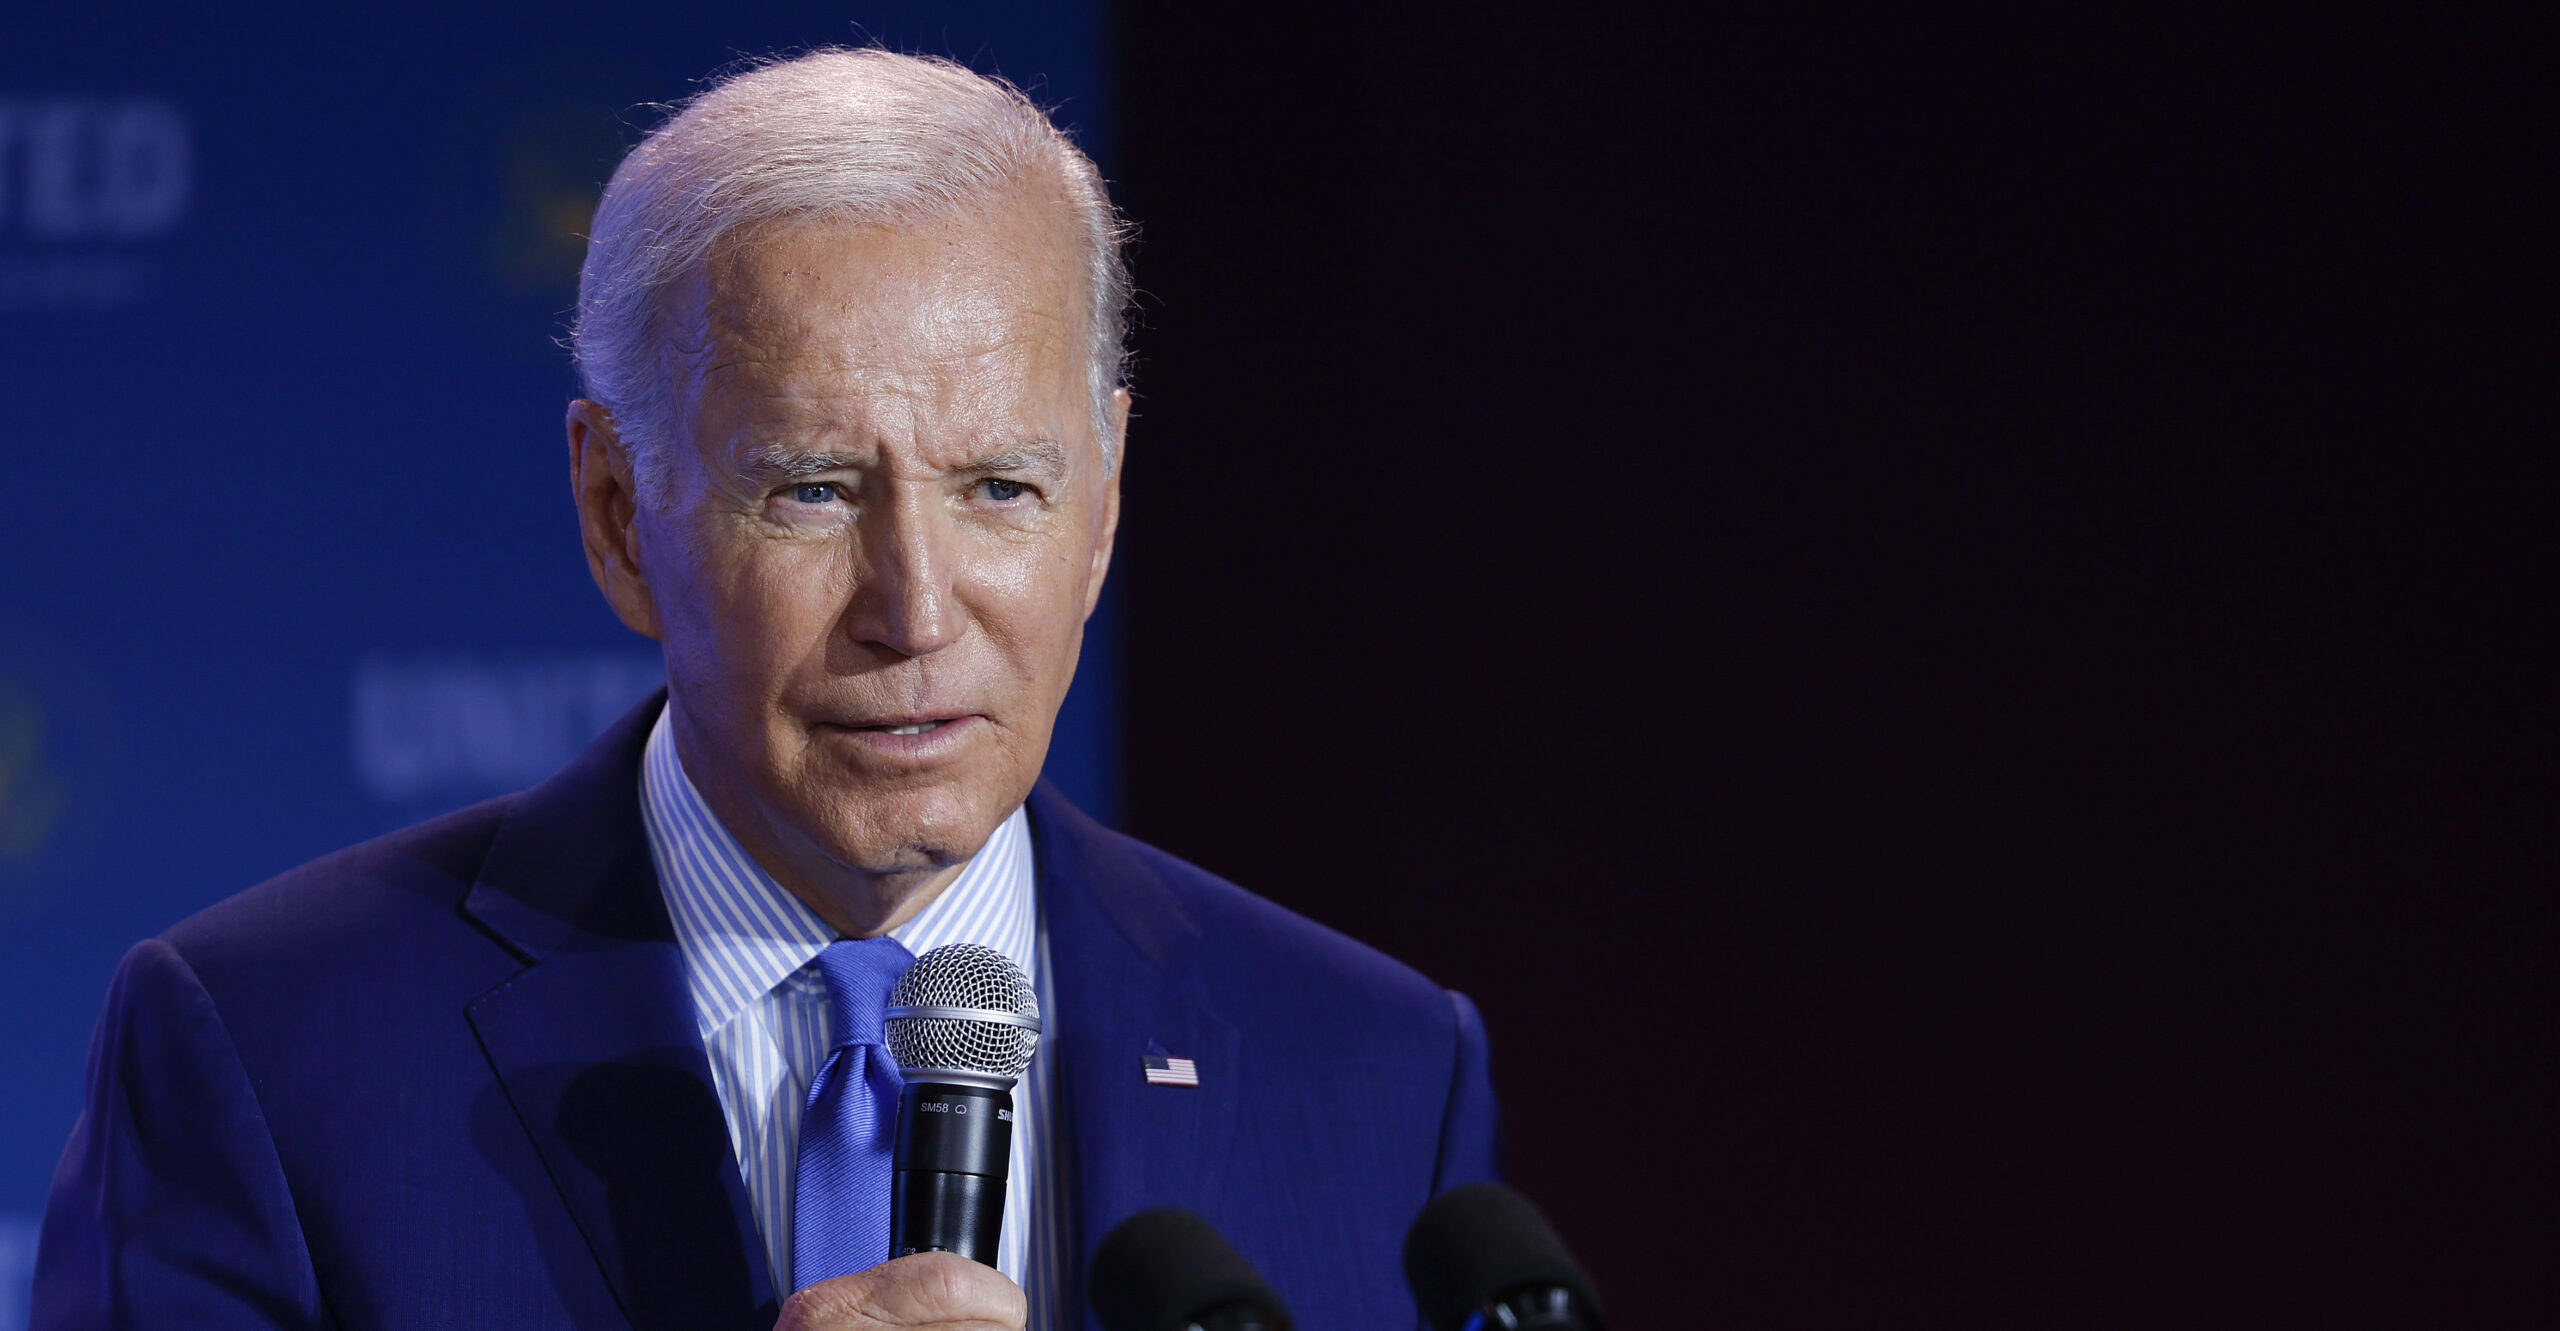 Biden Declares Pandemic ‘Over.’ So What About His COVID-19 Policies?